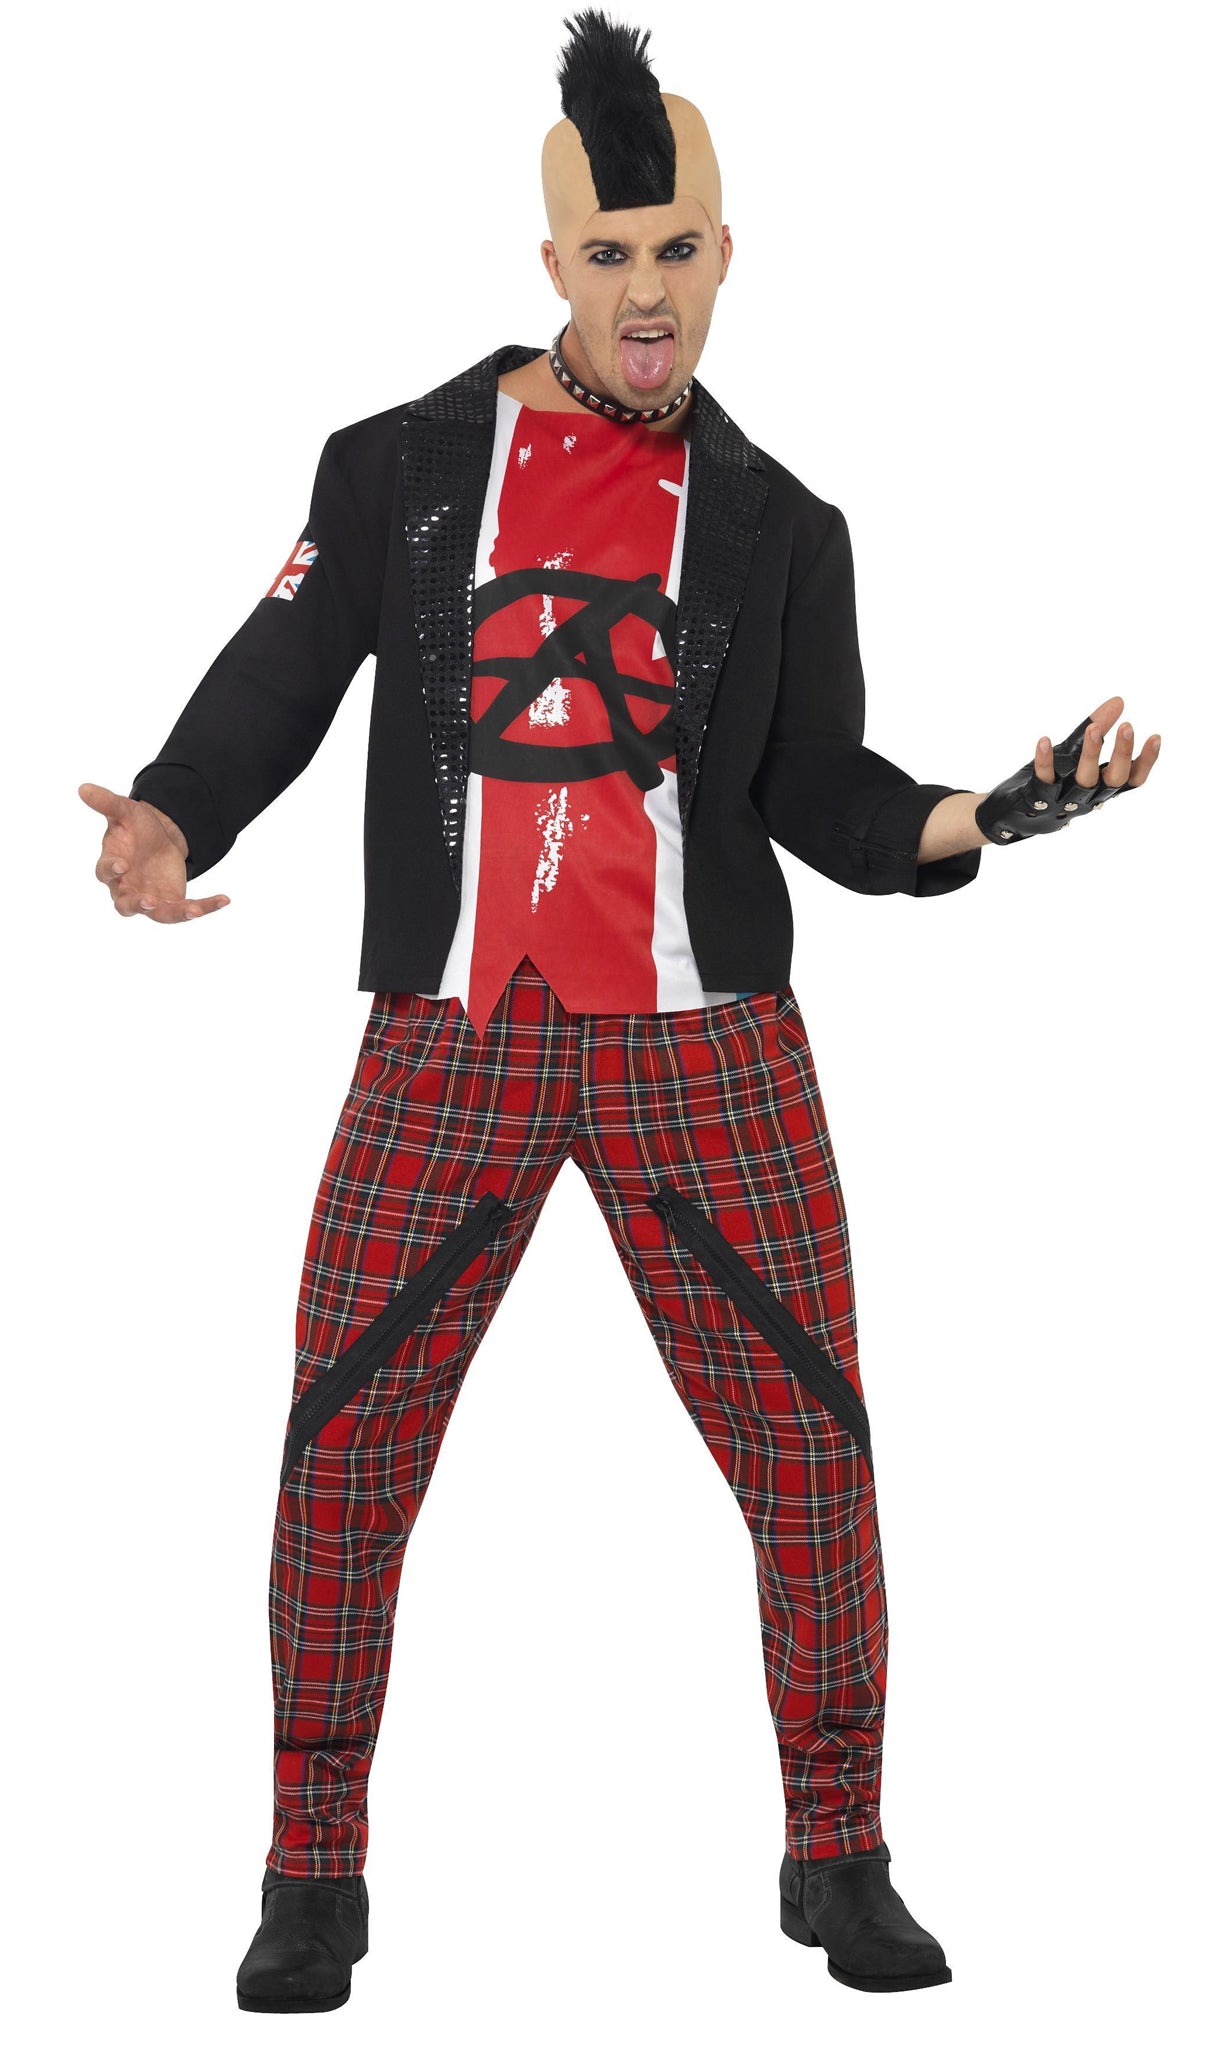 Black punk jacket with white and red top, with tartan pants